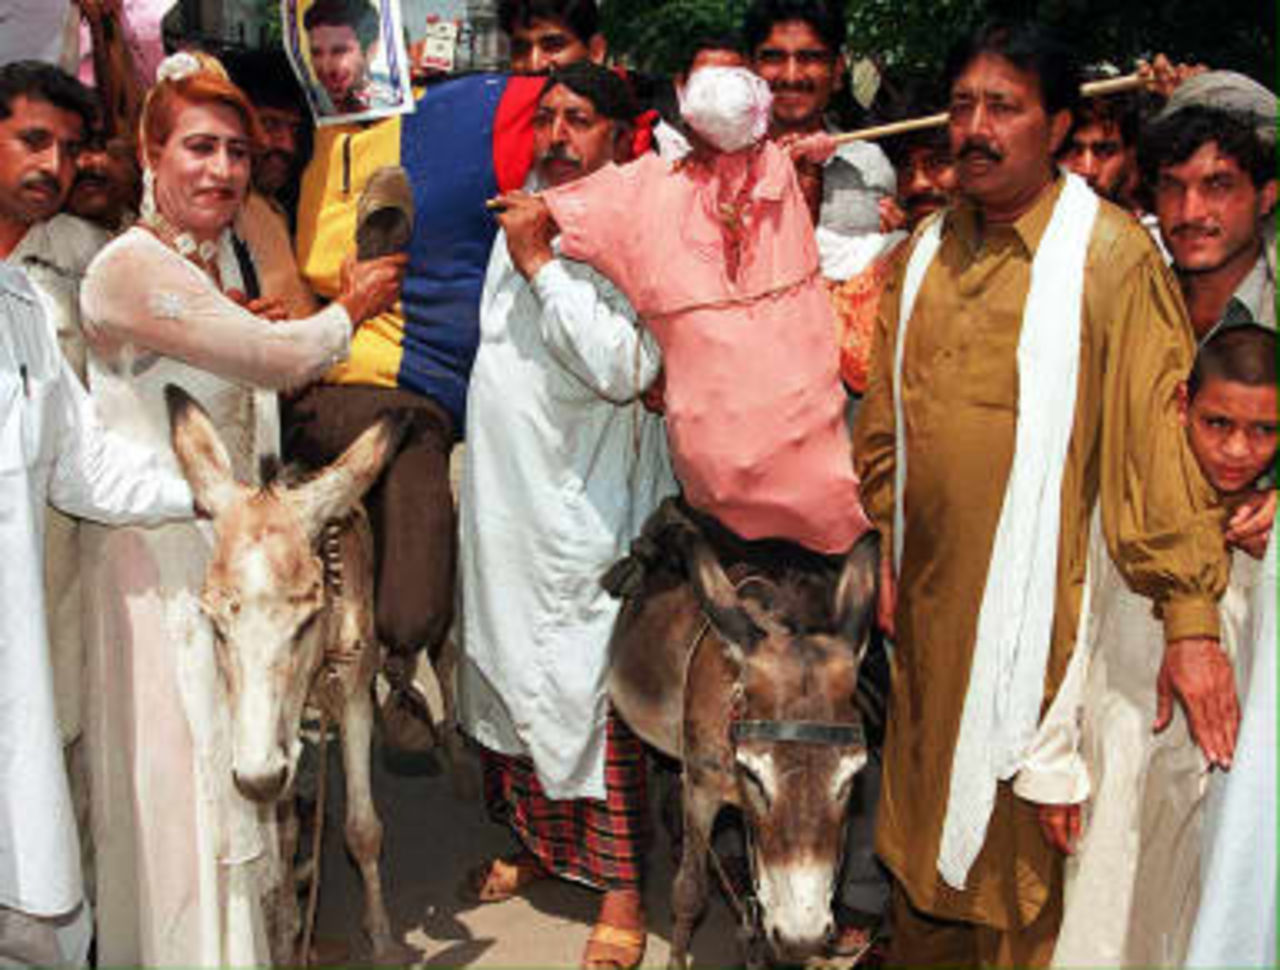 Effigies of Pakistan cricket team captain Wasim Akram and vice captain Moin Khan are given a donkey ride by fans to express their anger over the humiliating defeat by Australia in the World Cup final at Lords, in Lahore 22 June 1999.